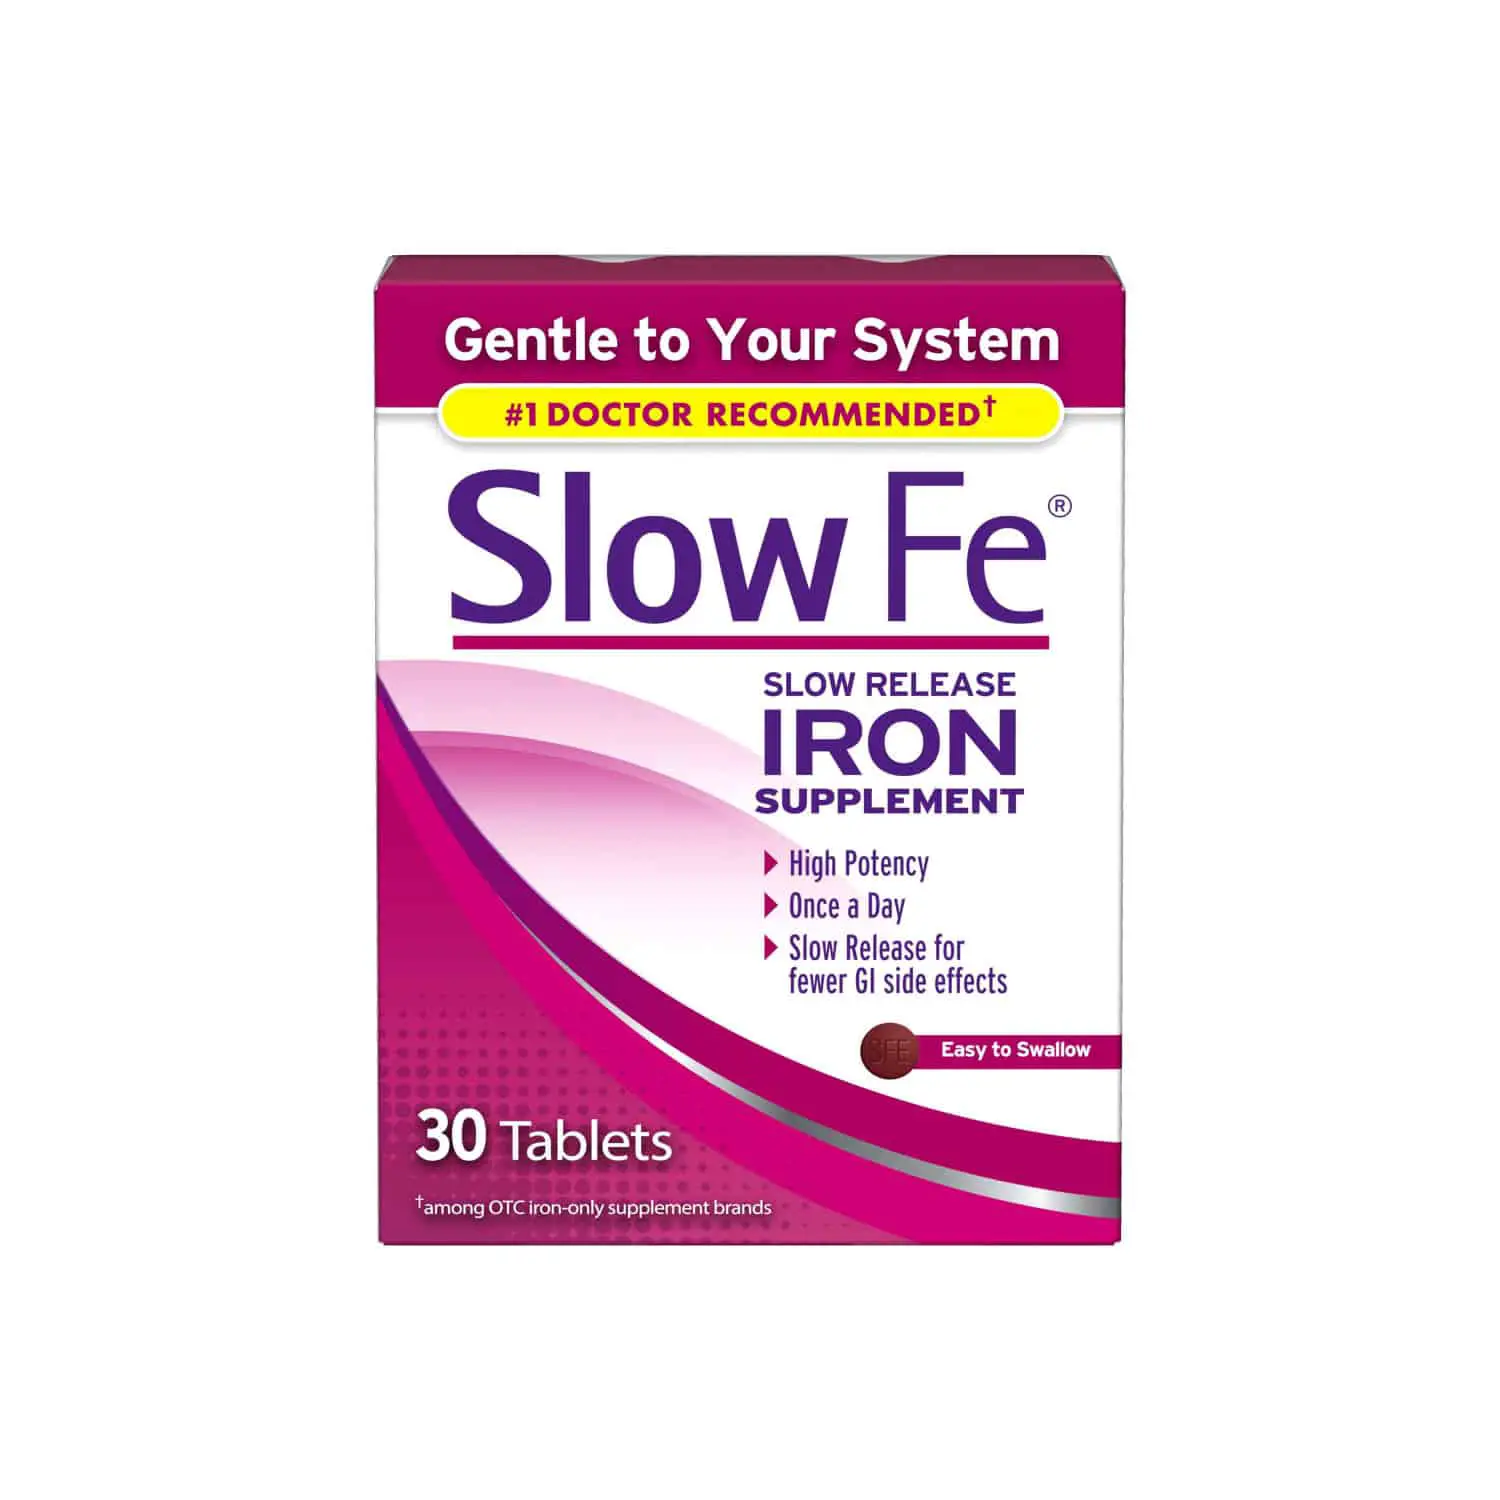 Slow Fe Iron Supplement Tablets for Iron Deficiency, Slow Release, High ...